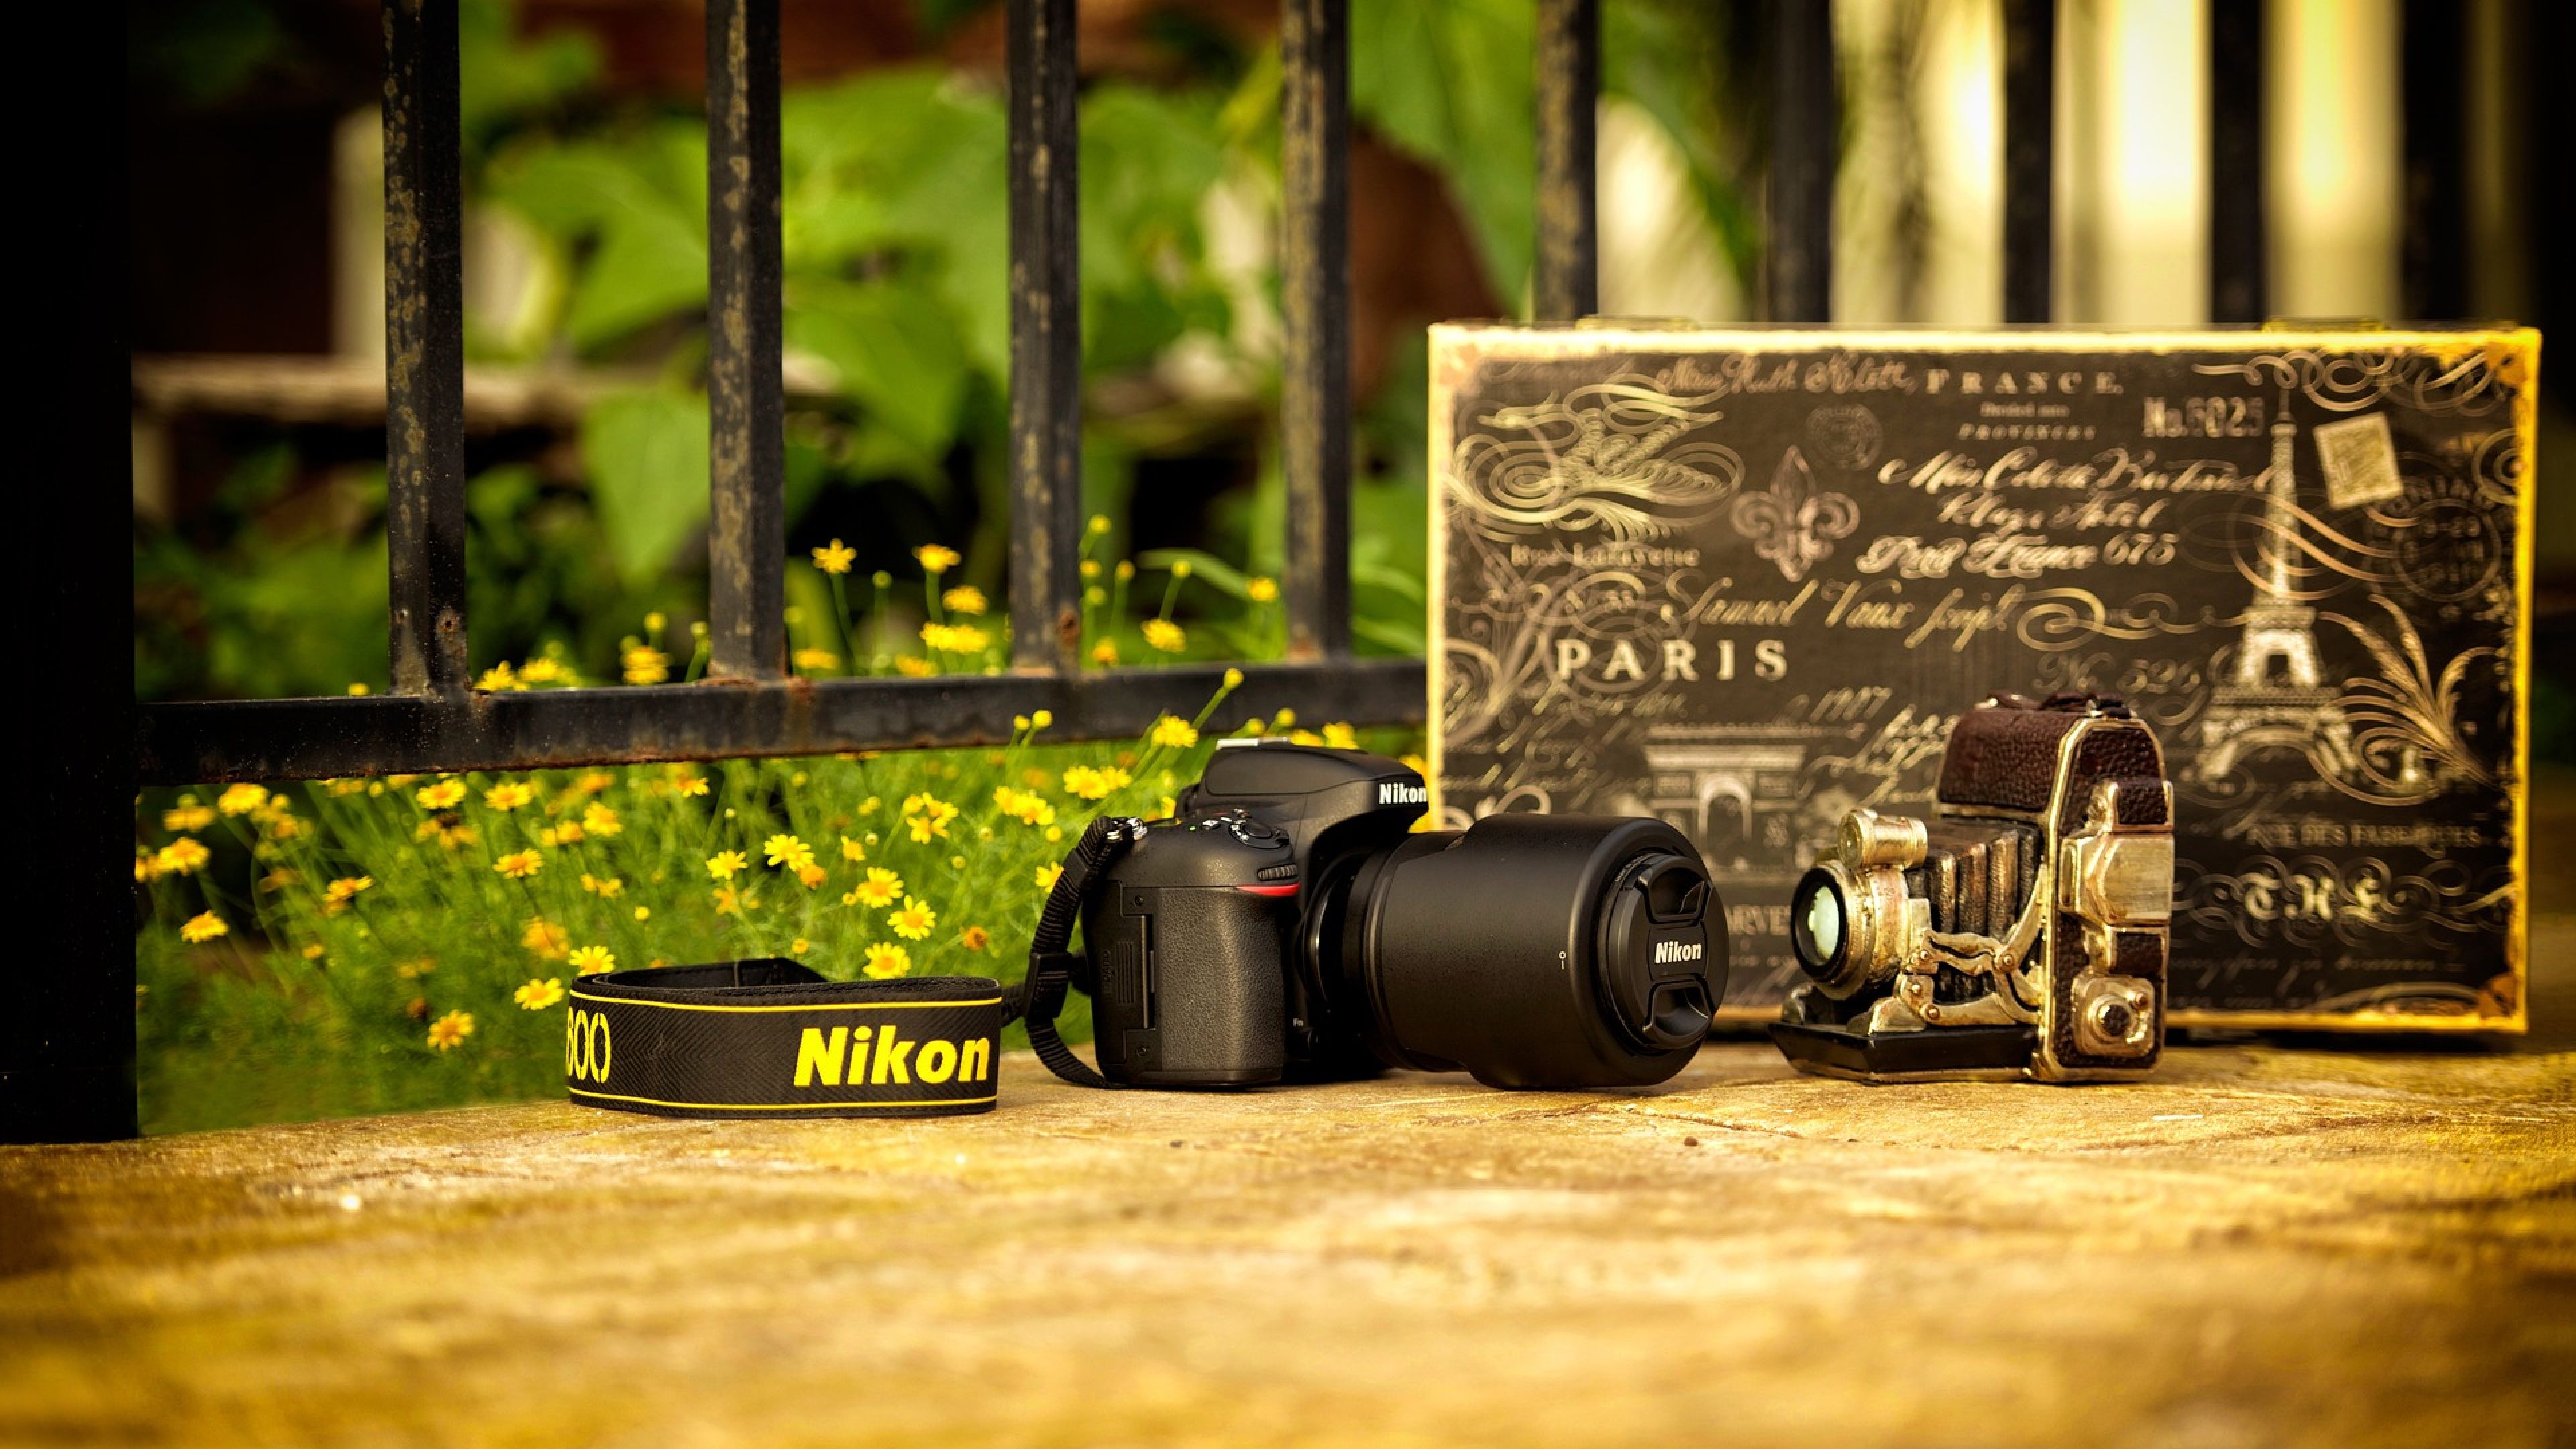 Nikon camera and vintage camera wallpaper and image, picture, photo